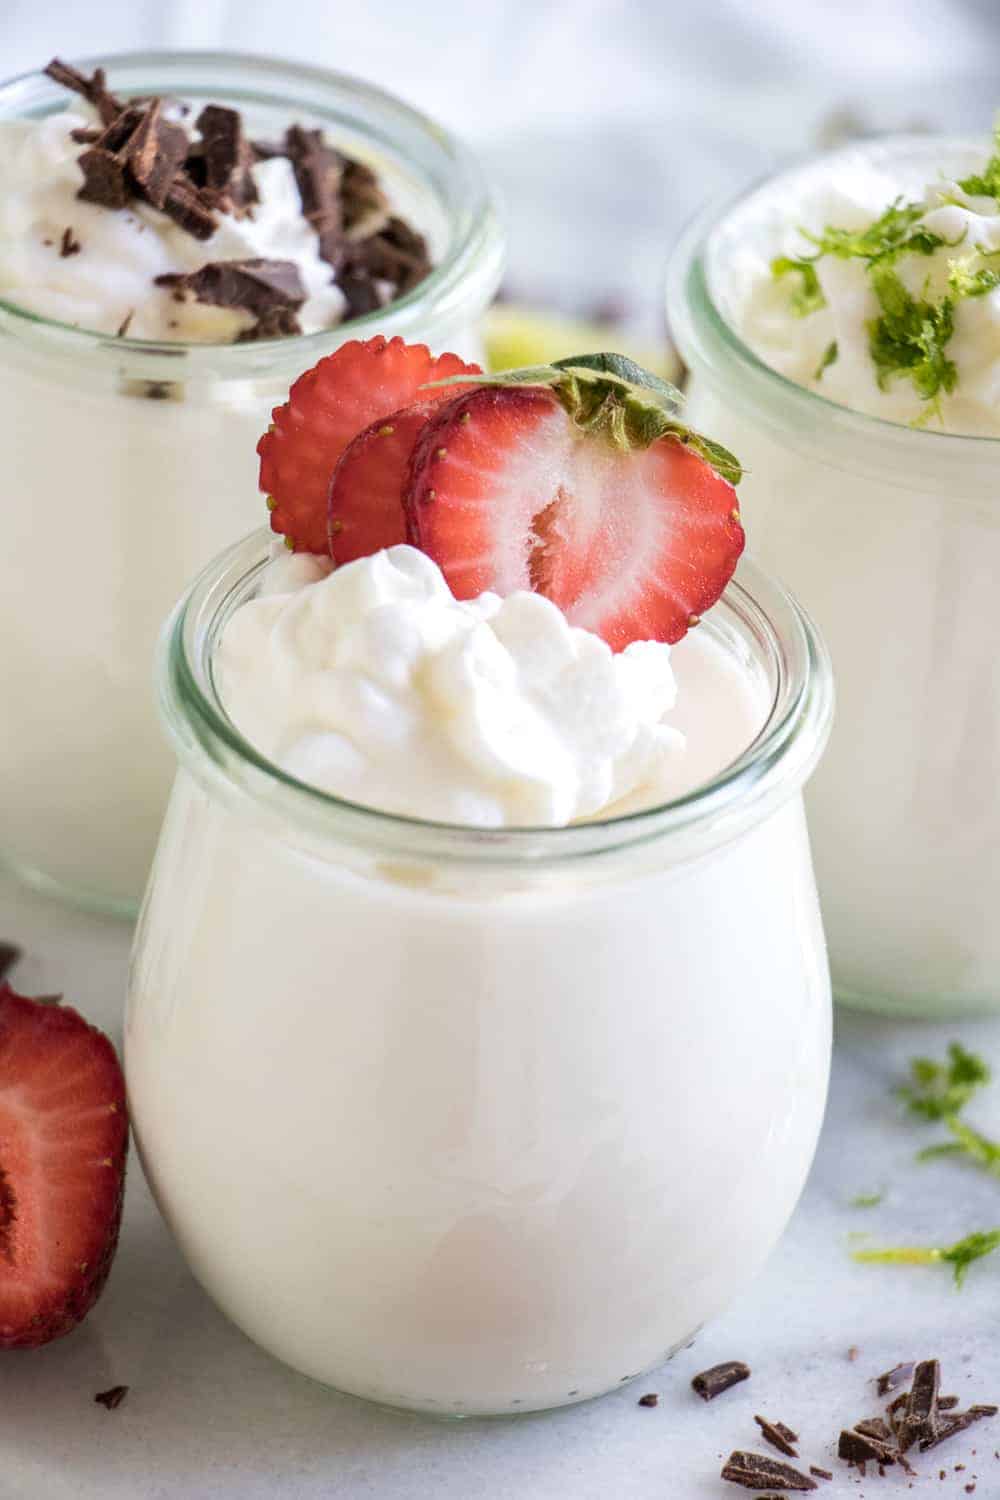 Coconut Mousse.  This fluffy coconut mousse comes together quick and easy and is loaded with cold coconut flavor!  Top with your favorite toppings and it's the perfect summer dessert!